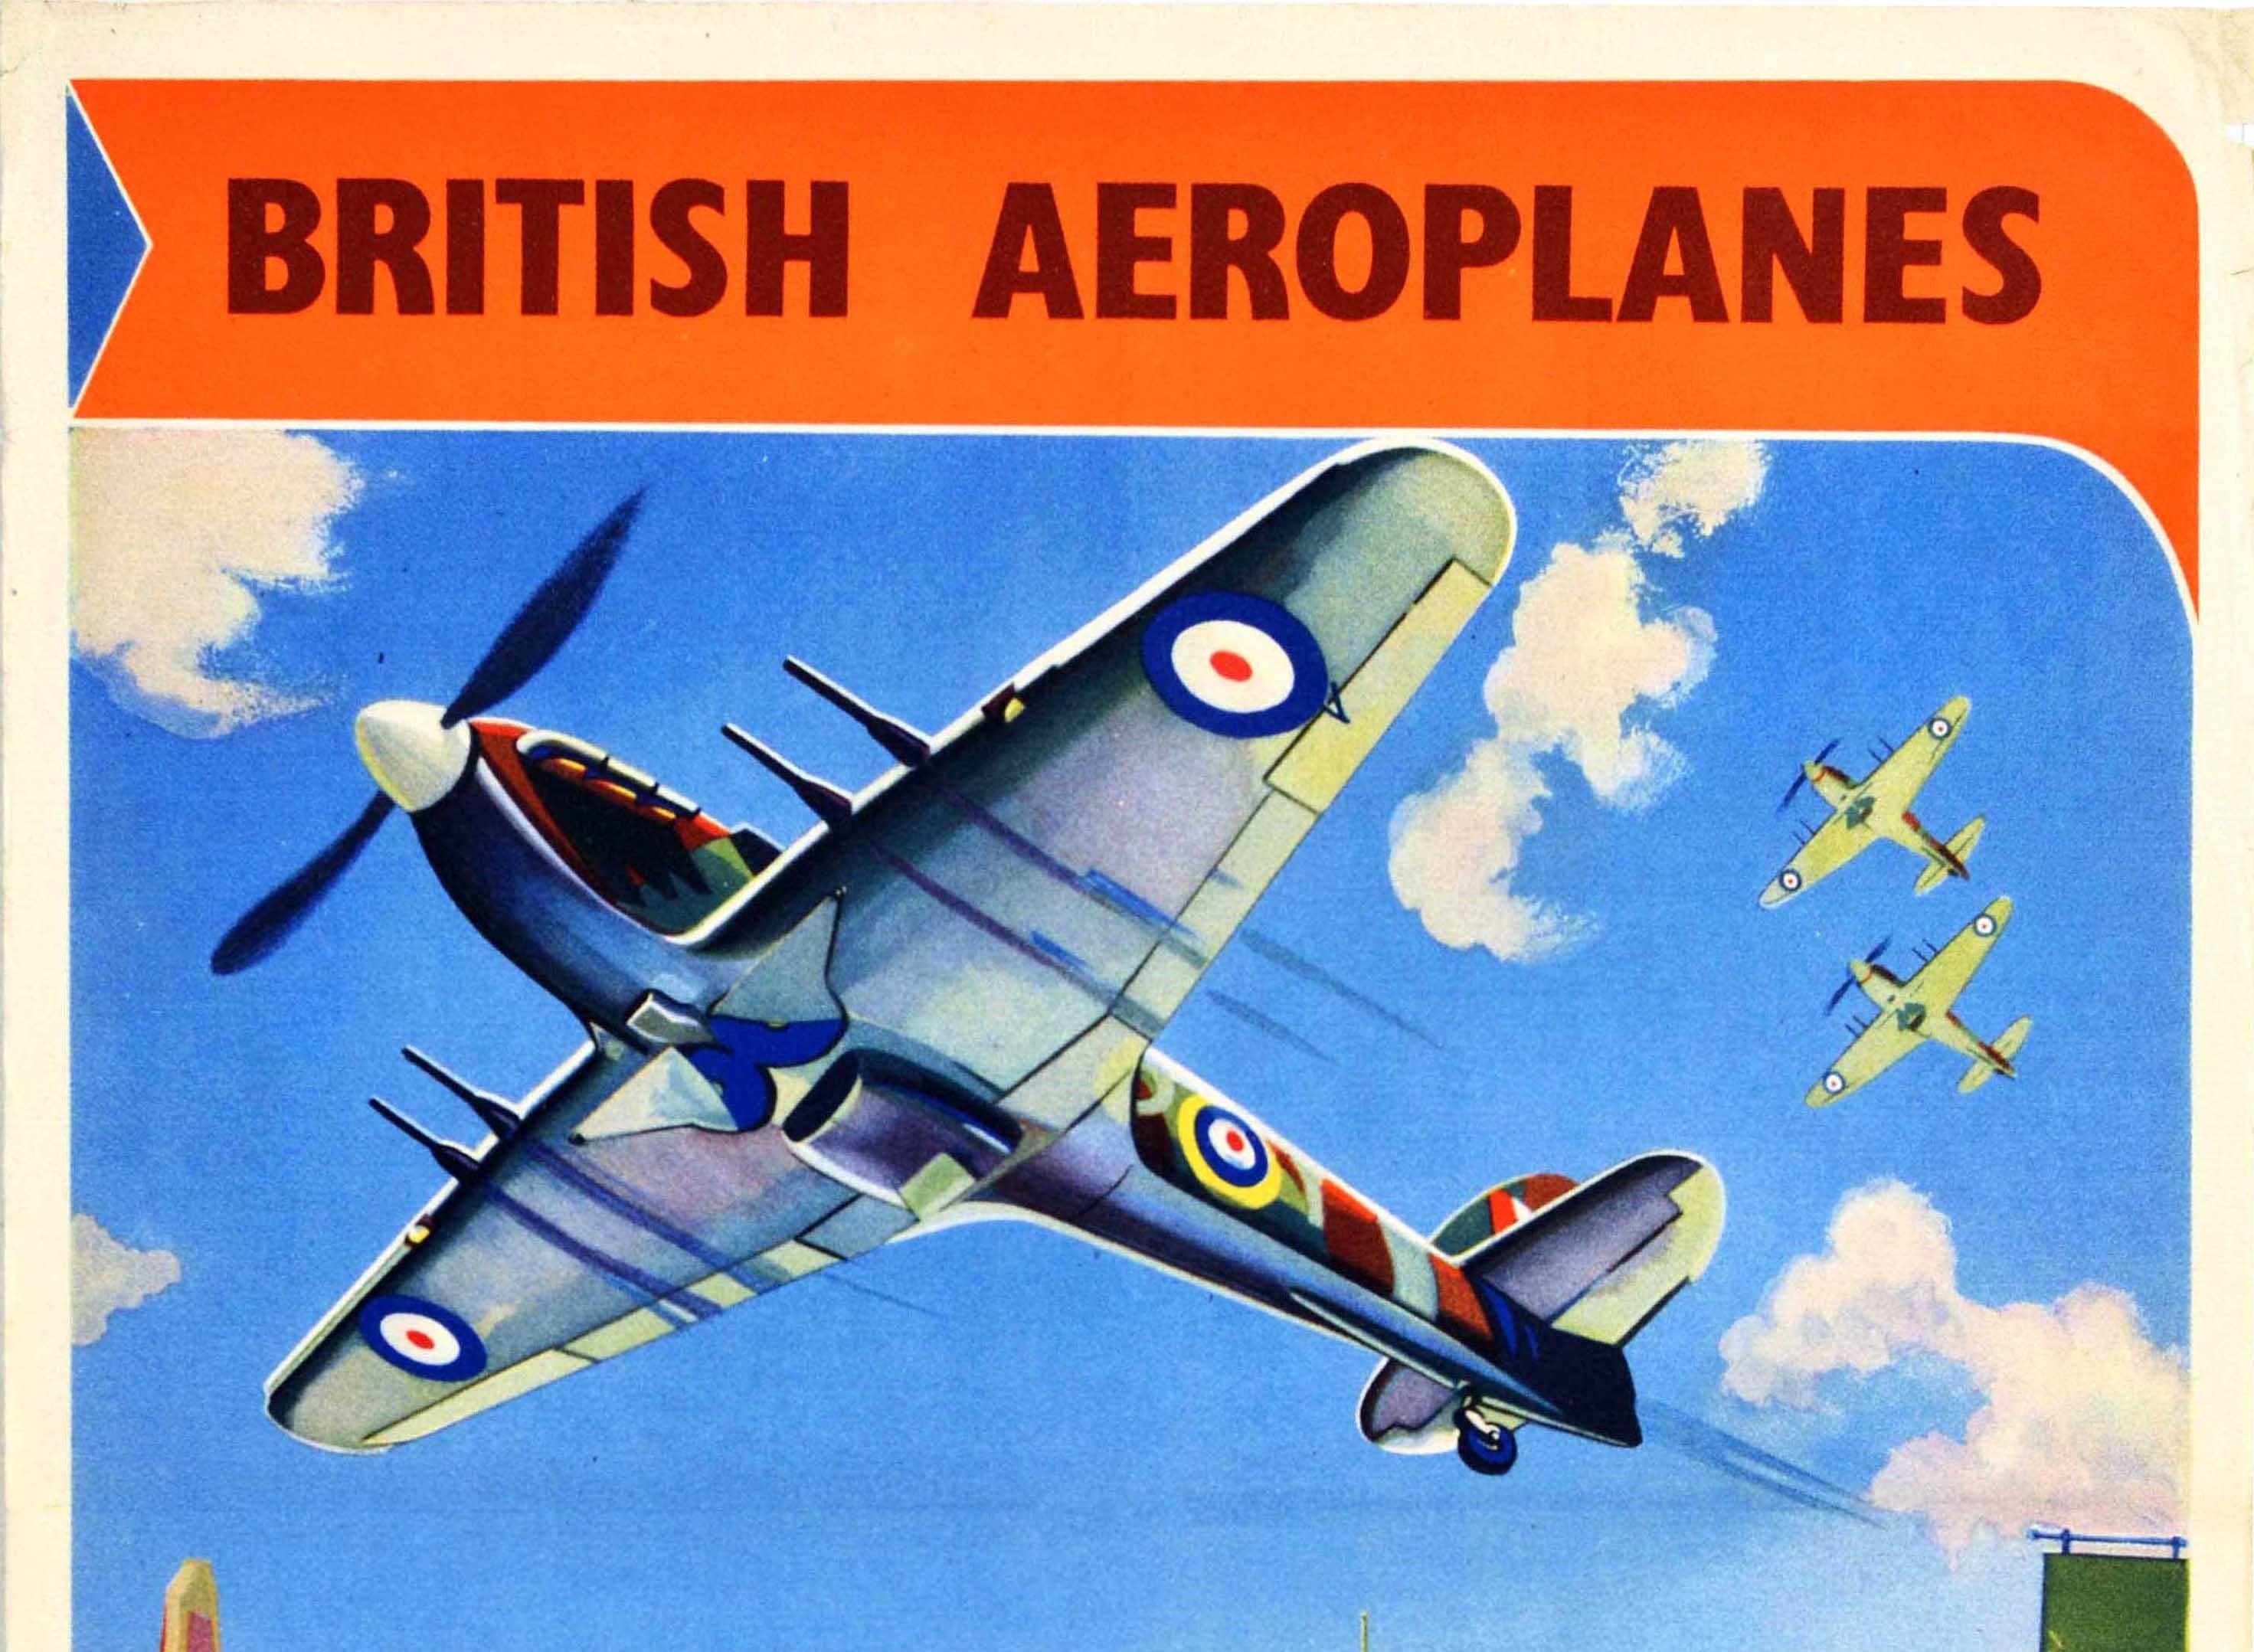 Original vintage World War Two propaganda poster - British Aeroplanes Guard African Skies - featuring a colourful design depicting a Royal Air Force RAF Spitfire plane flying low over a busy street in Africa with a hill in the distance and two more